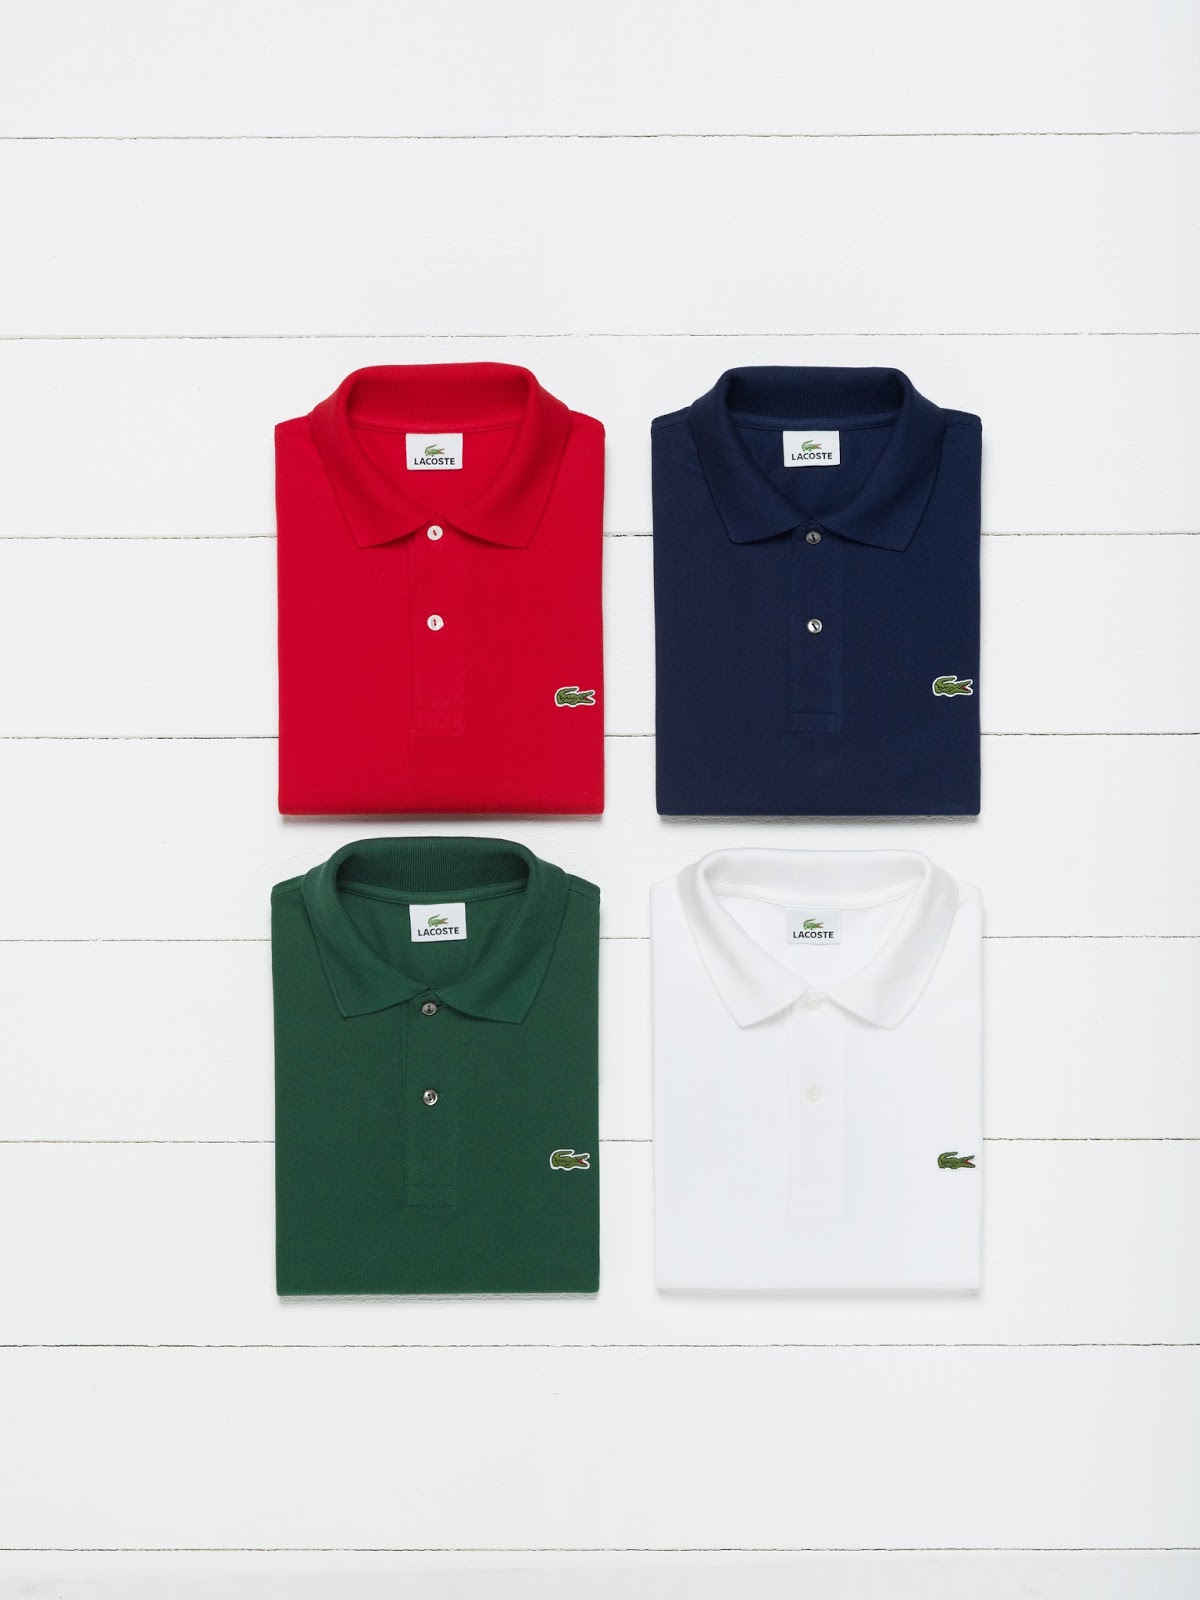 Why I Must Have Lacoste Polo Shirt?